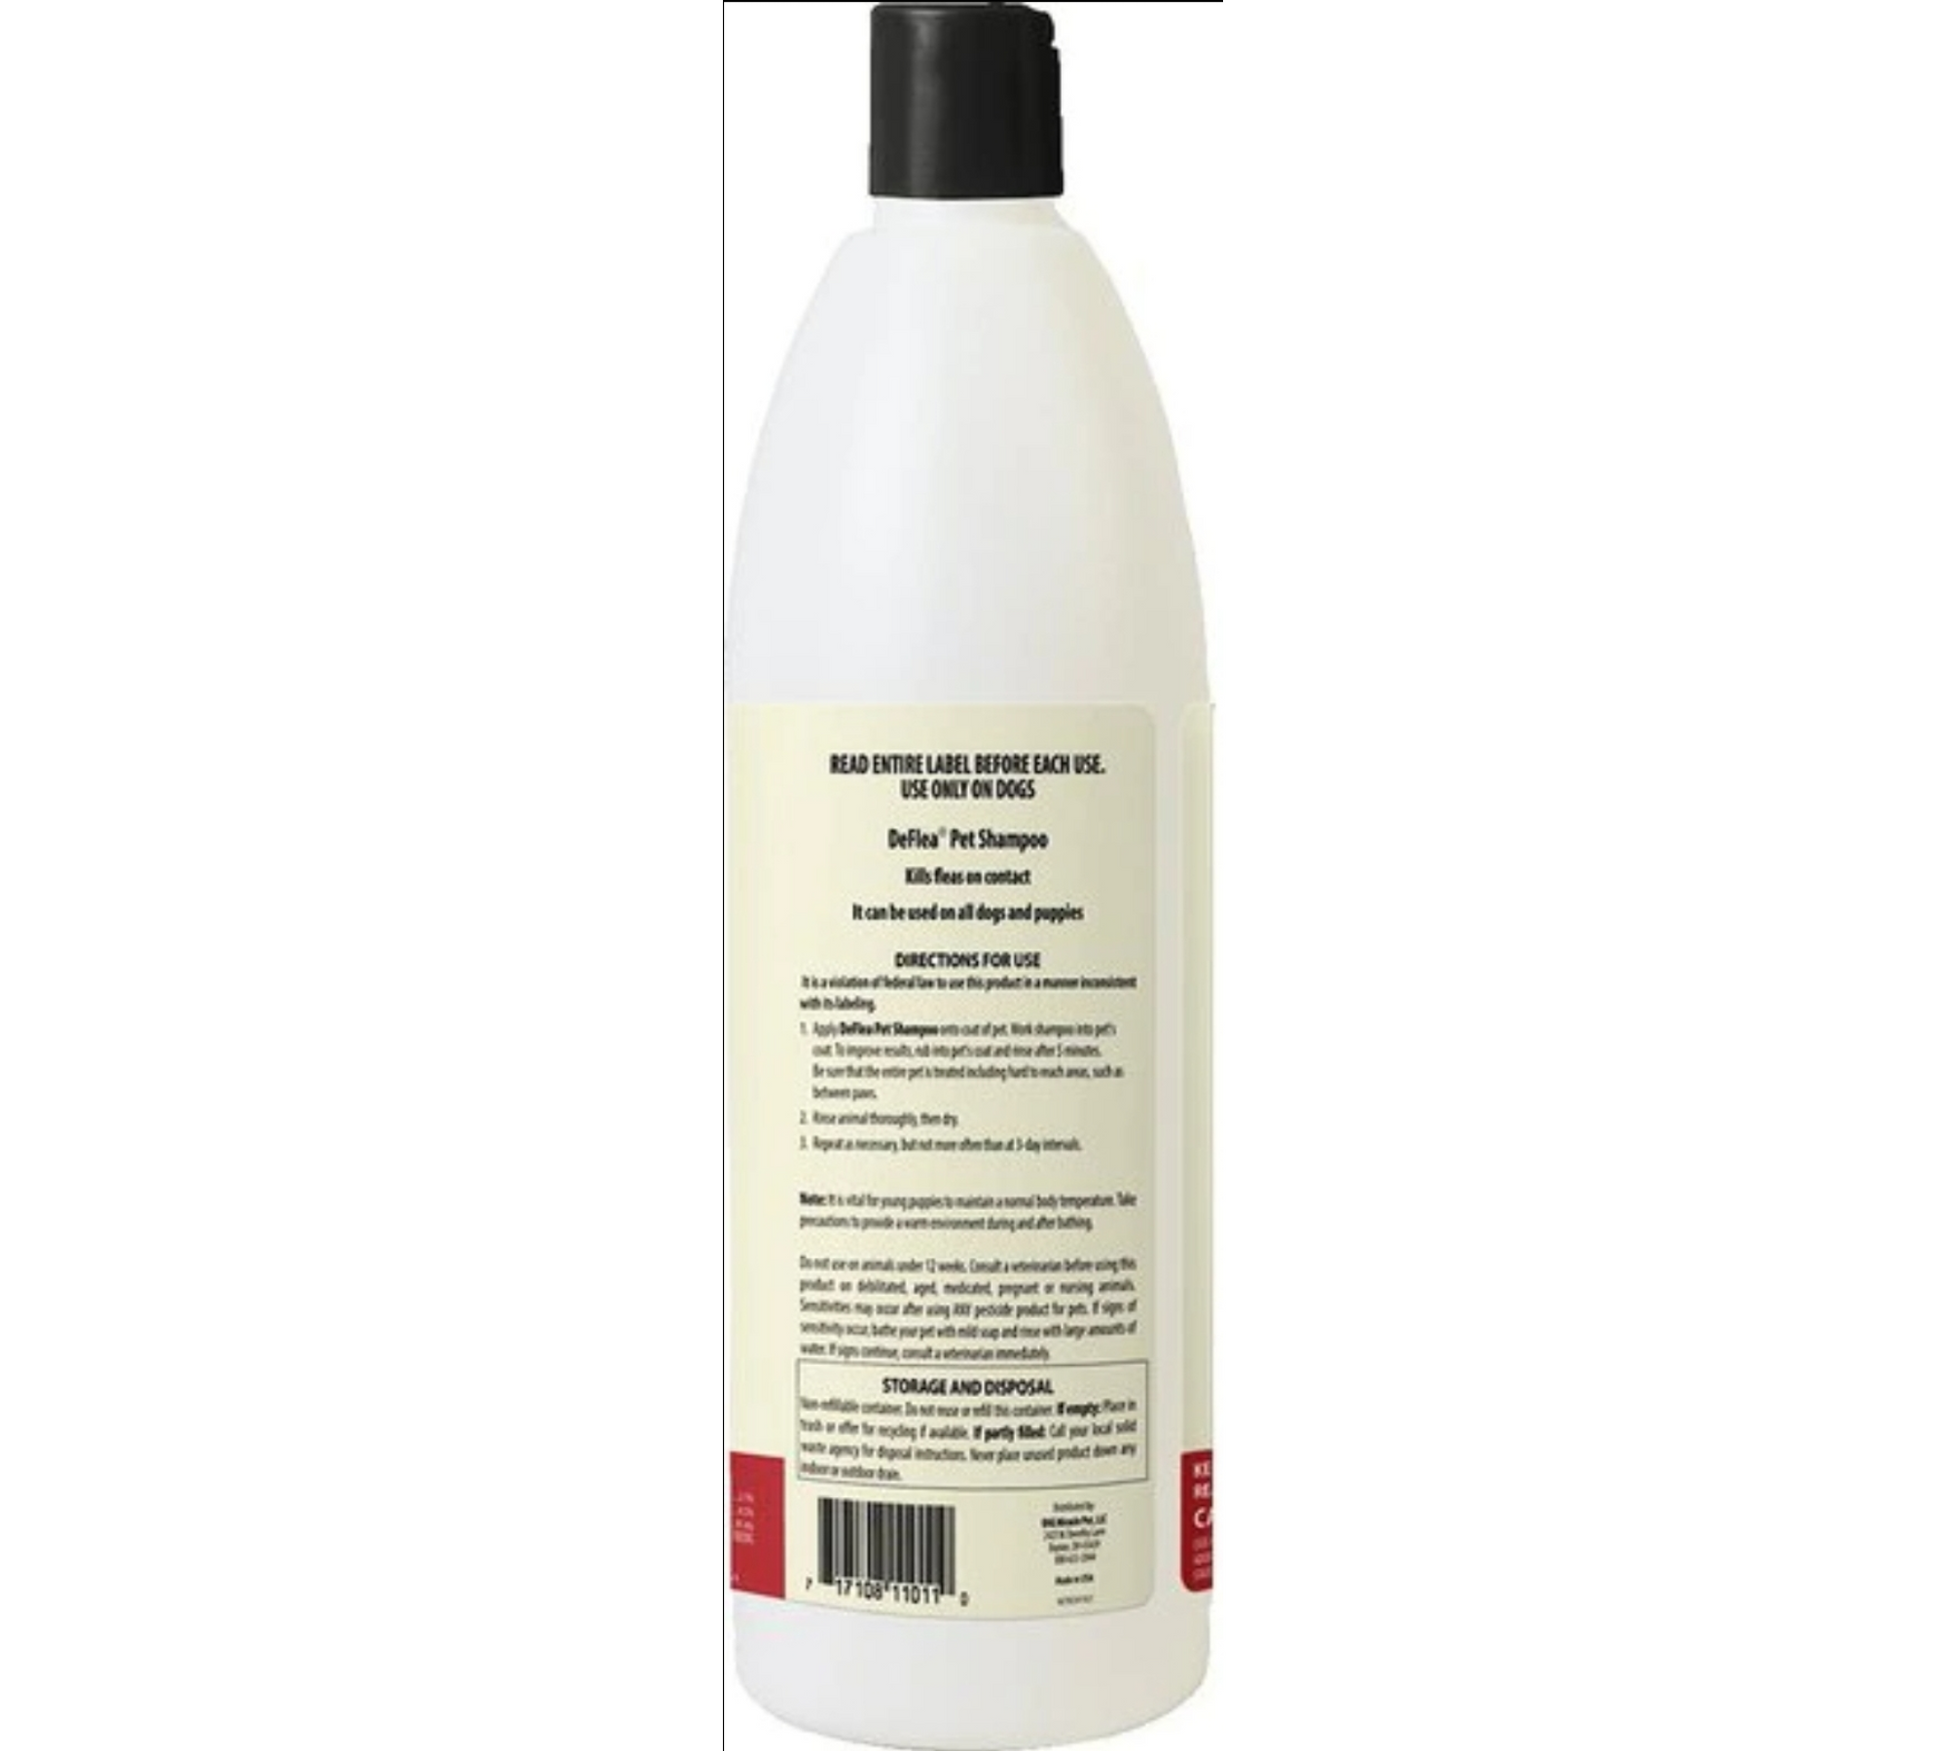 Canine's World Dog Shampoos Miracle Care De Flea Shampoo for Dogs & Puppies Miracle Care